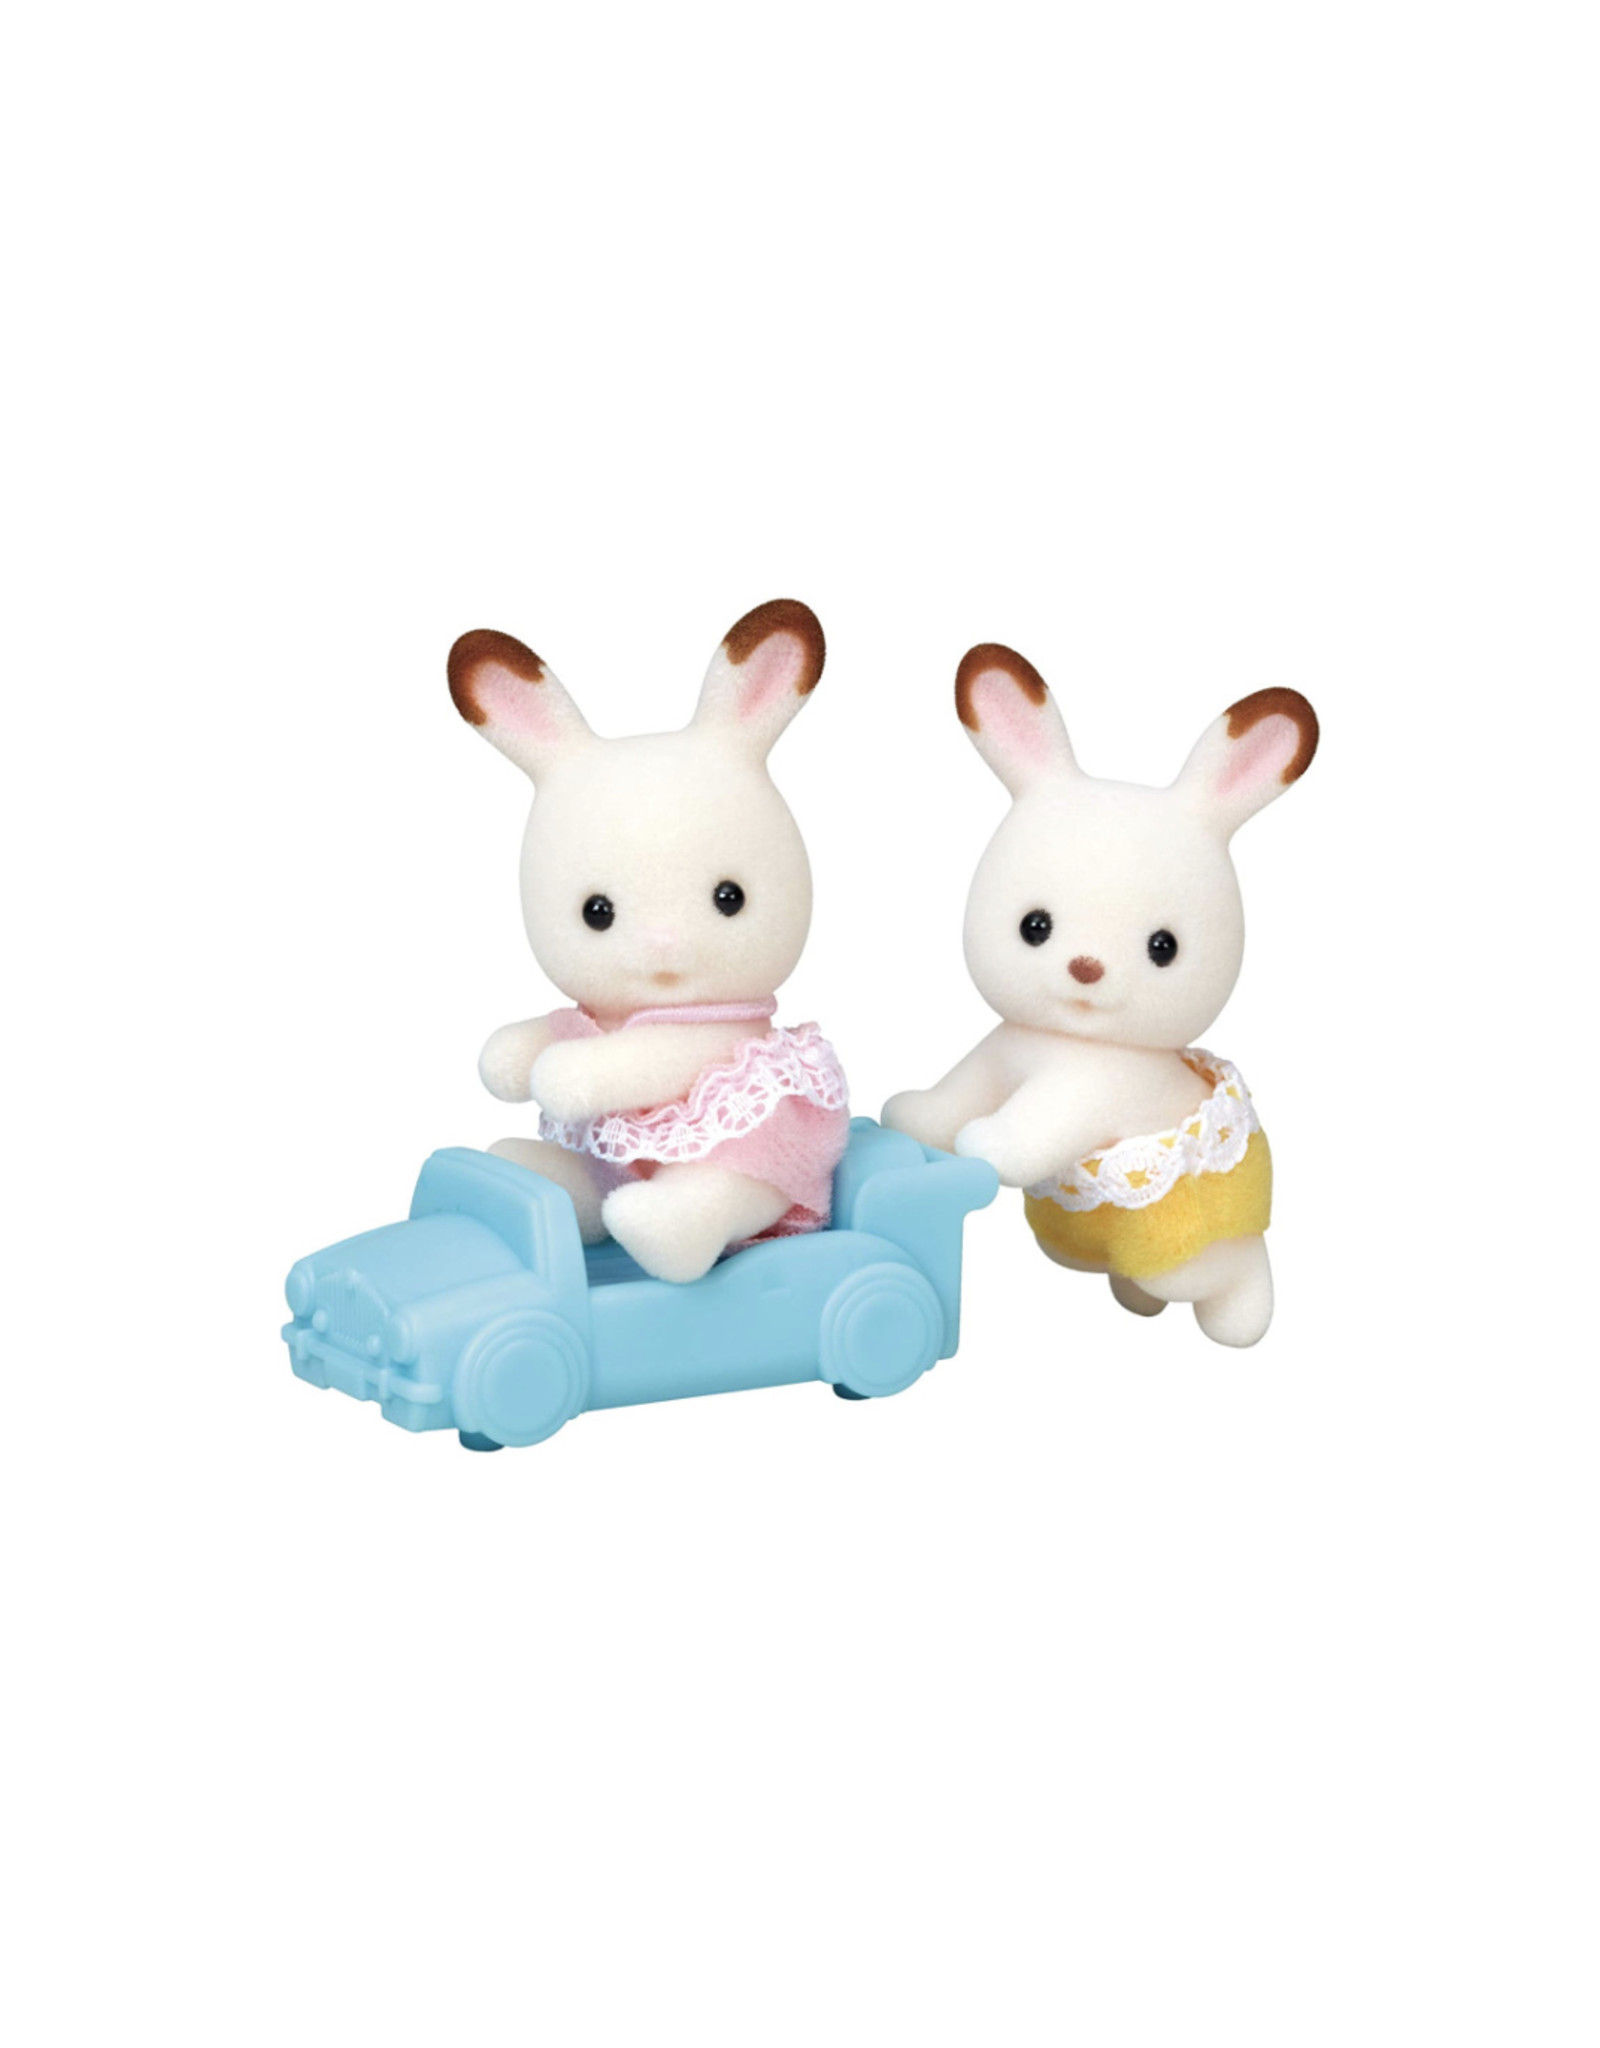 Calico Critters Calico Critters Chocolate Rabbit Twins